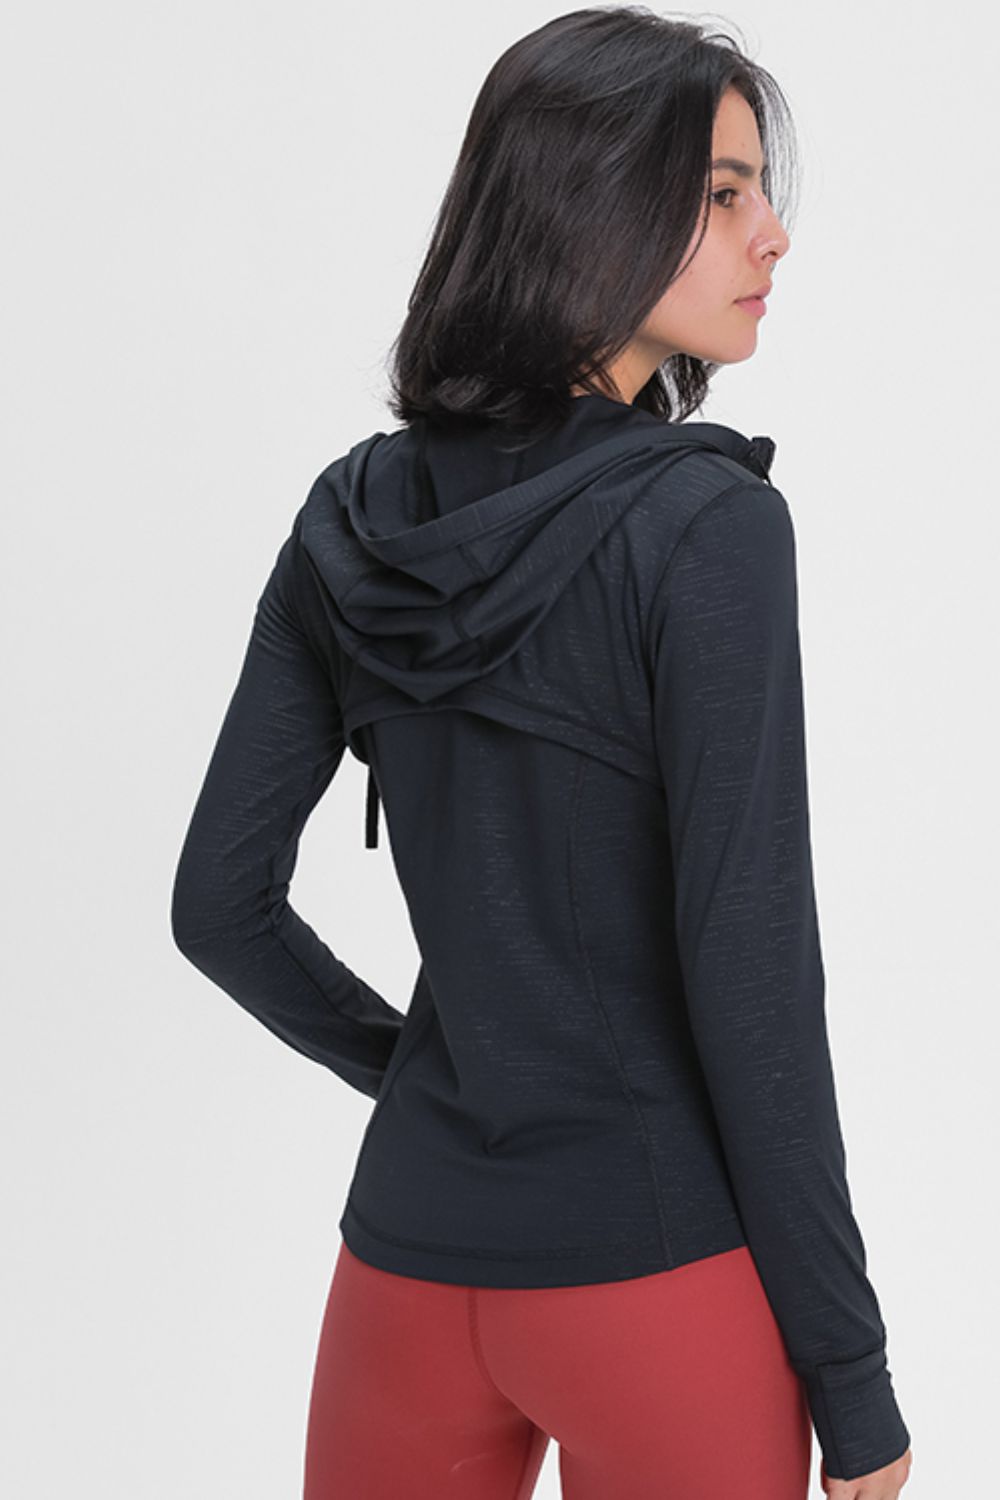 Drawstring Detail Zip Up Sports Jacket with Pockets Shapelust